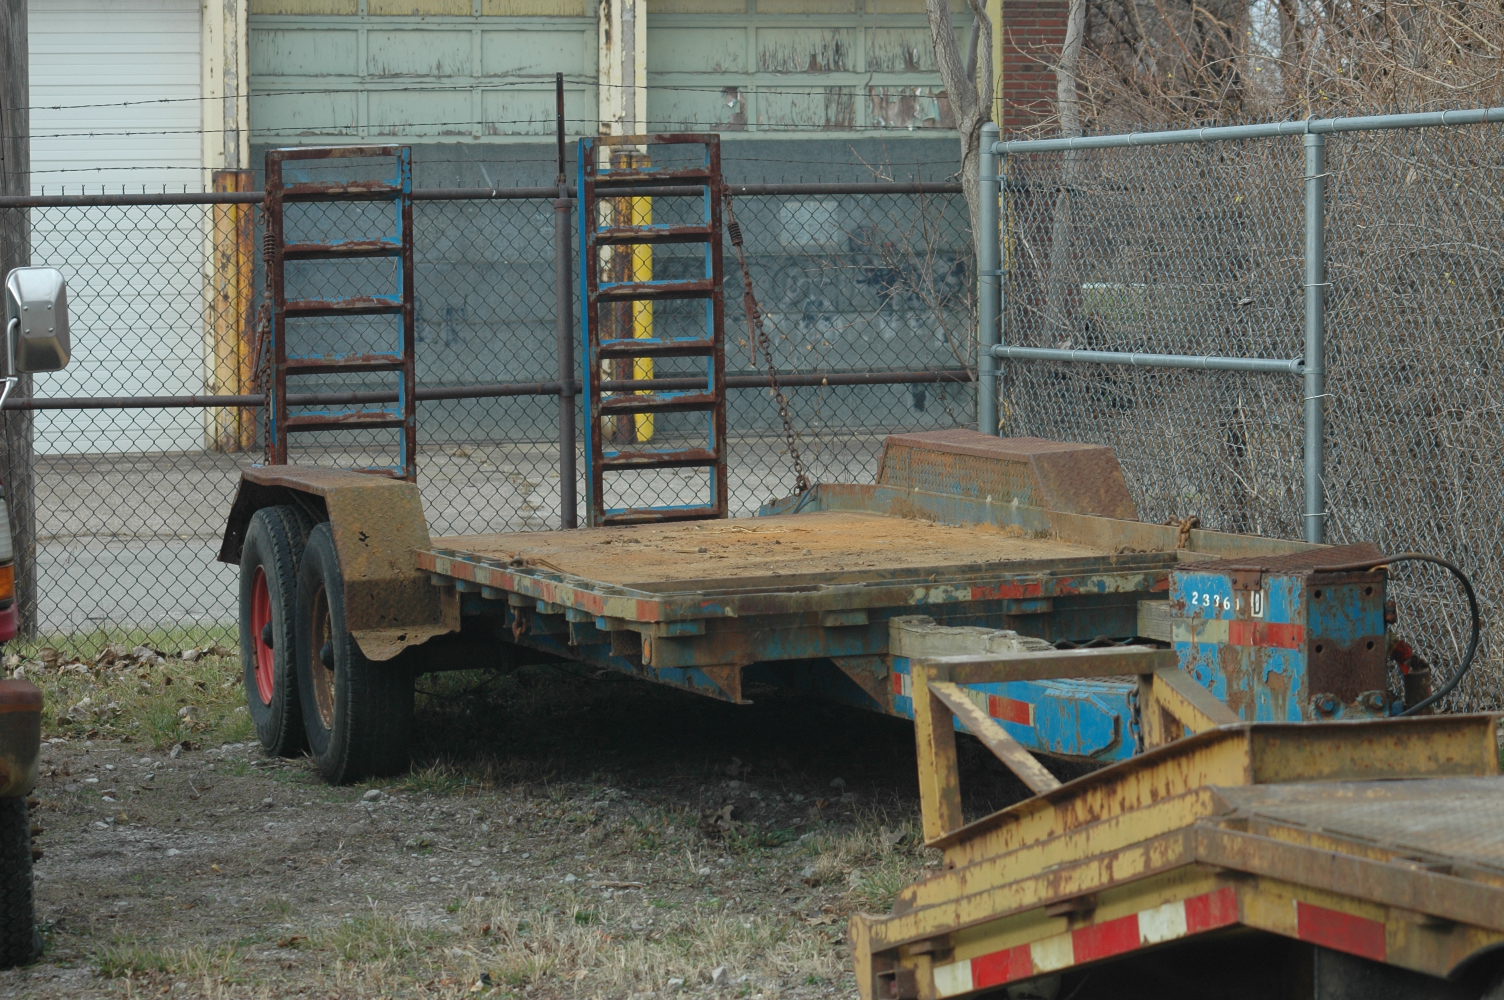 Grossman Auction Pictures From March 1, 2016 - 952 E 72 Street Cleveland Ohio 44103